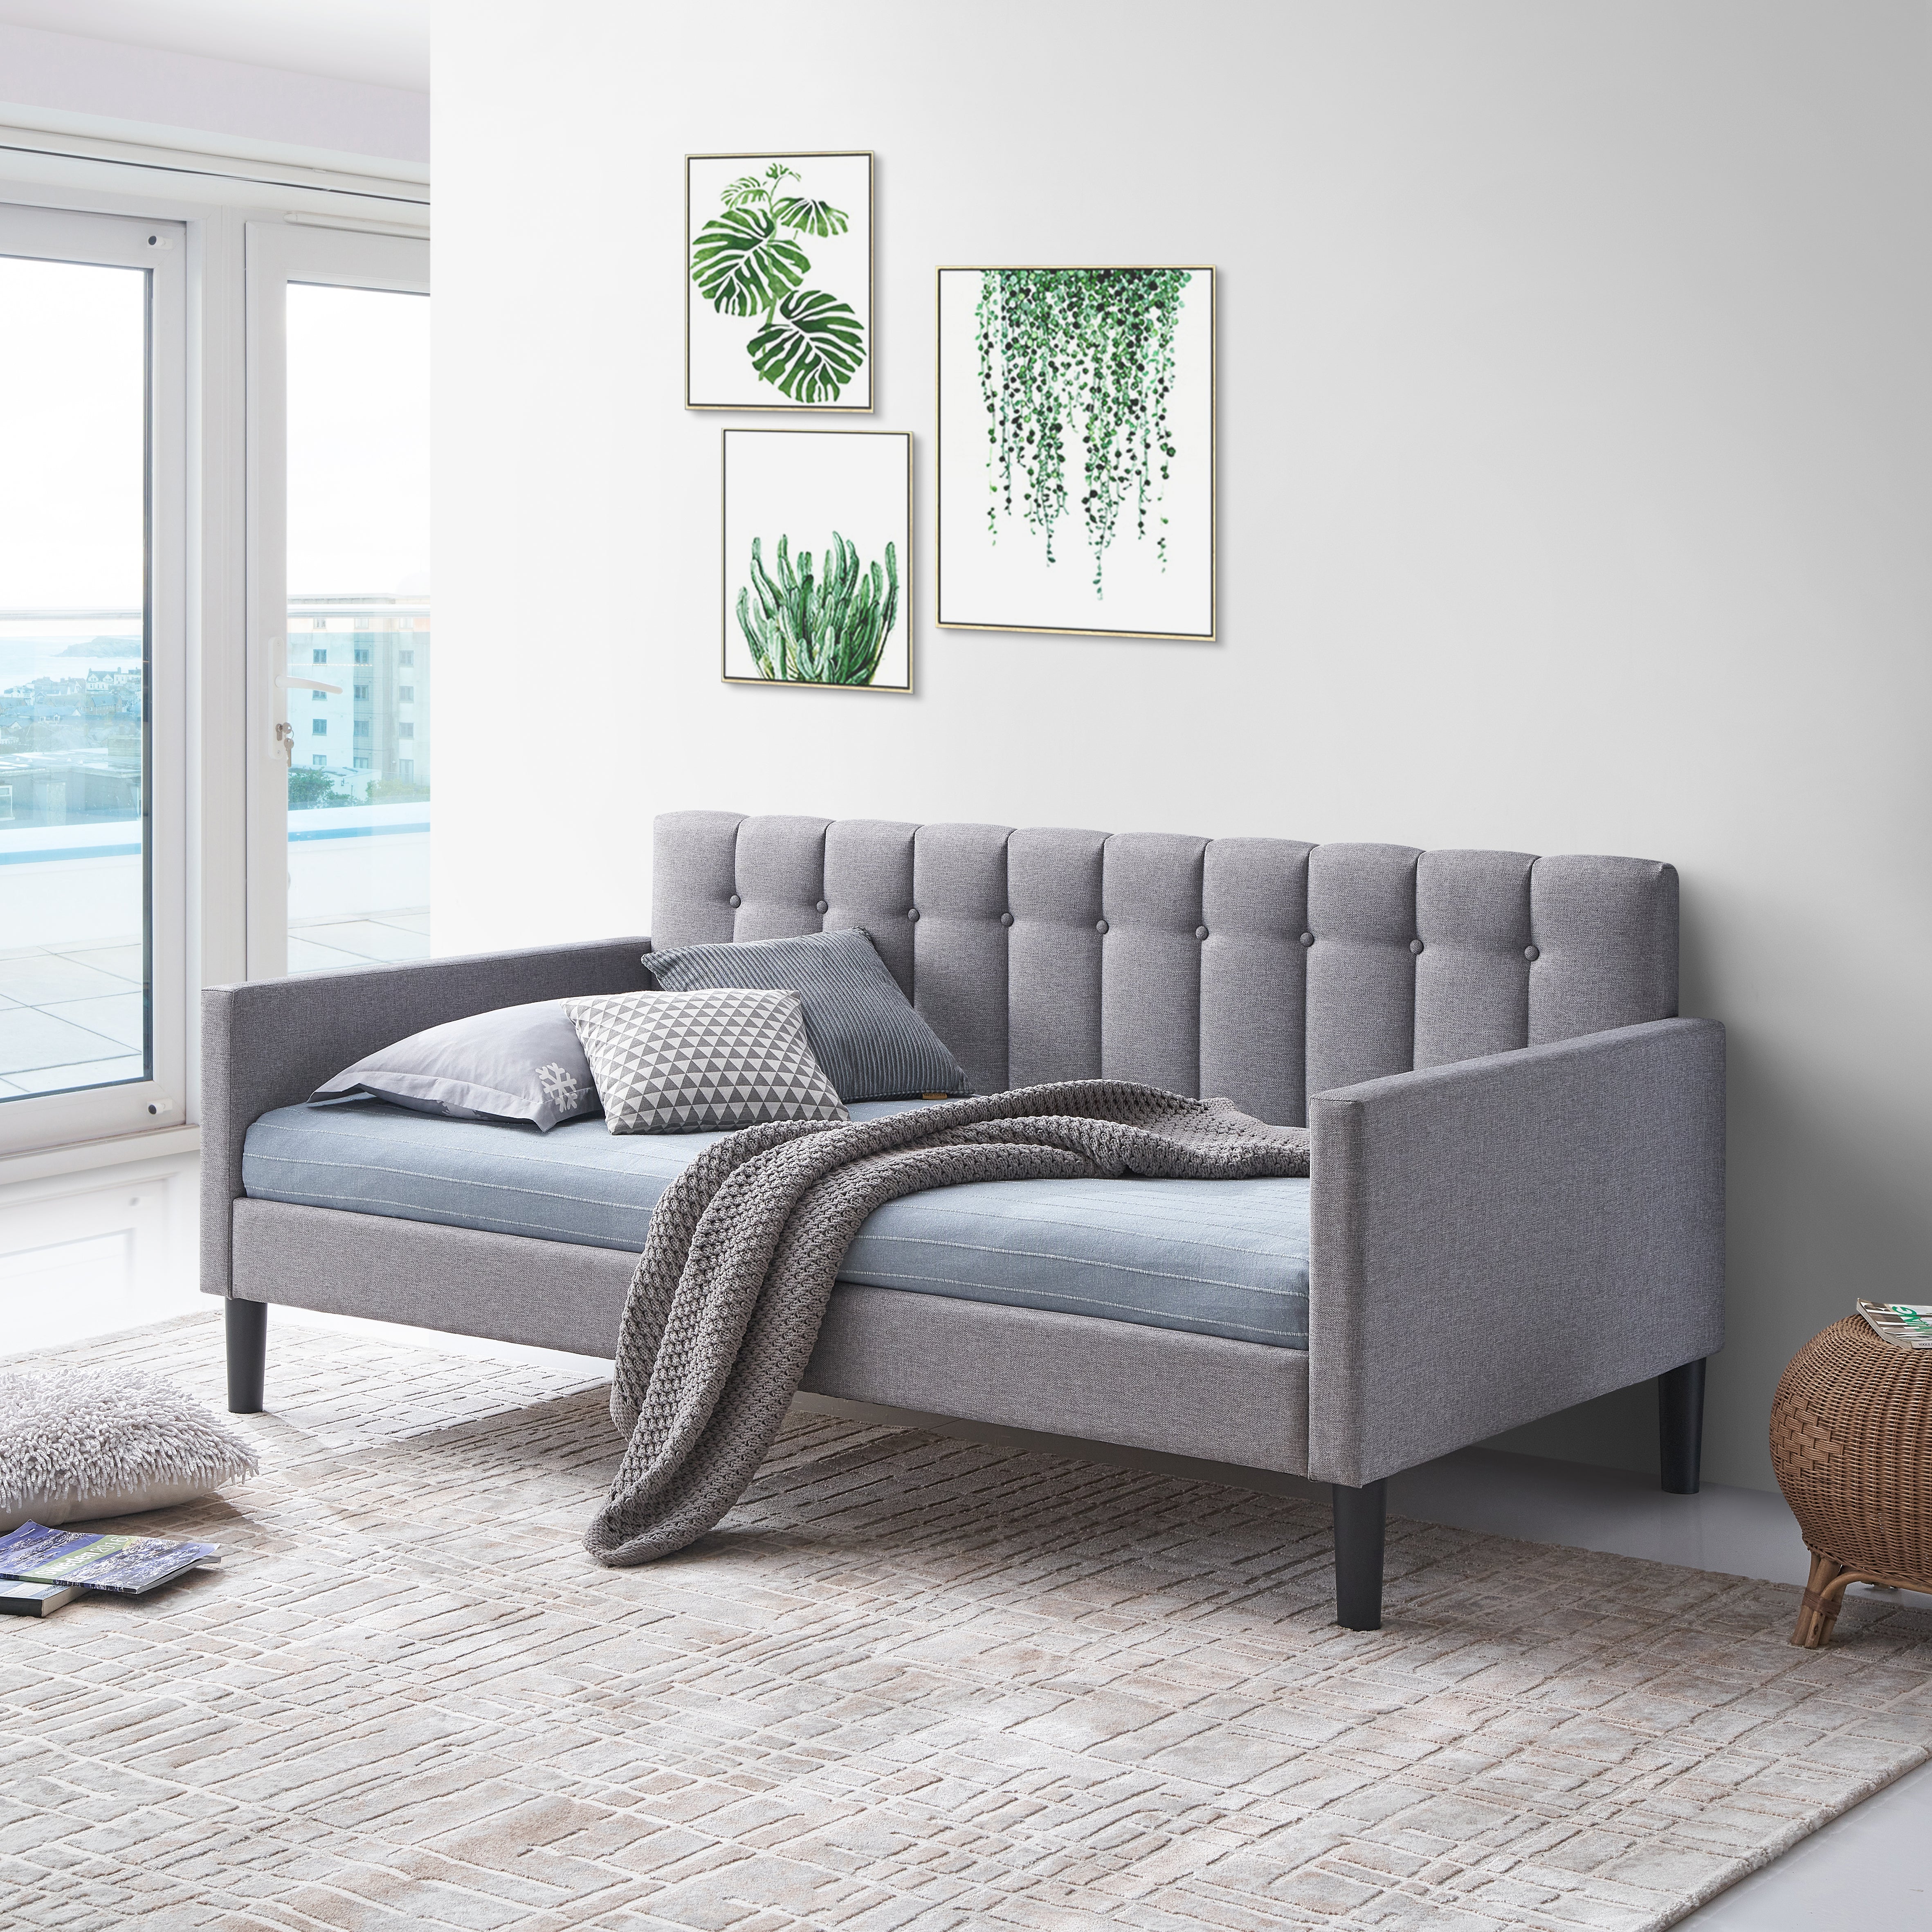 LuXeo Dana Twin Size Upholstered Day Bed in Gray Fabric